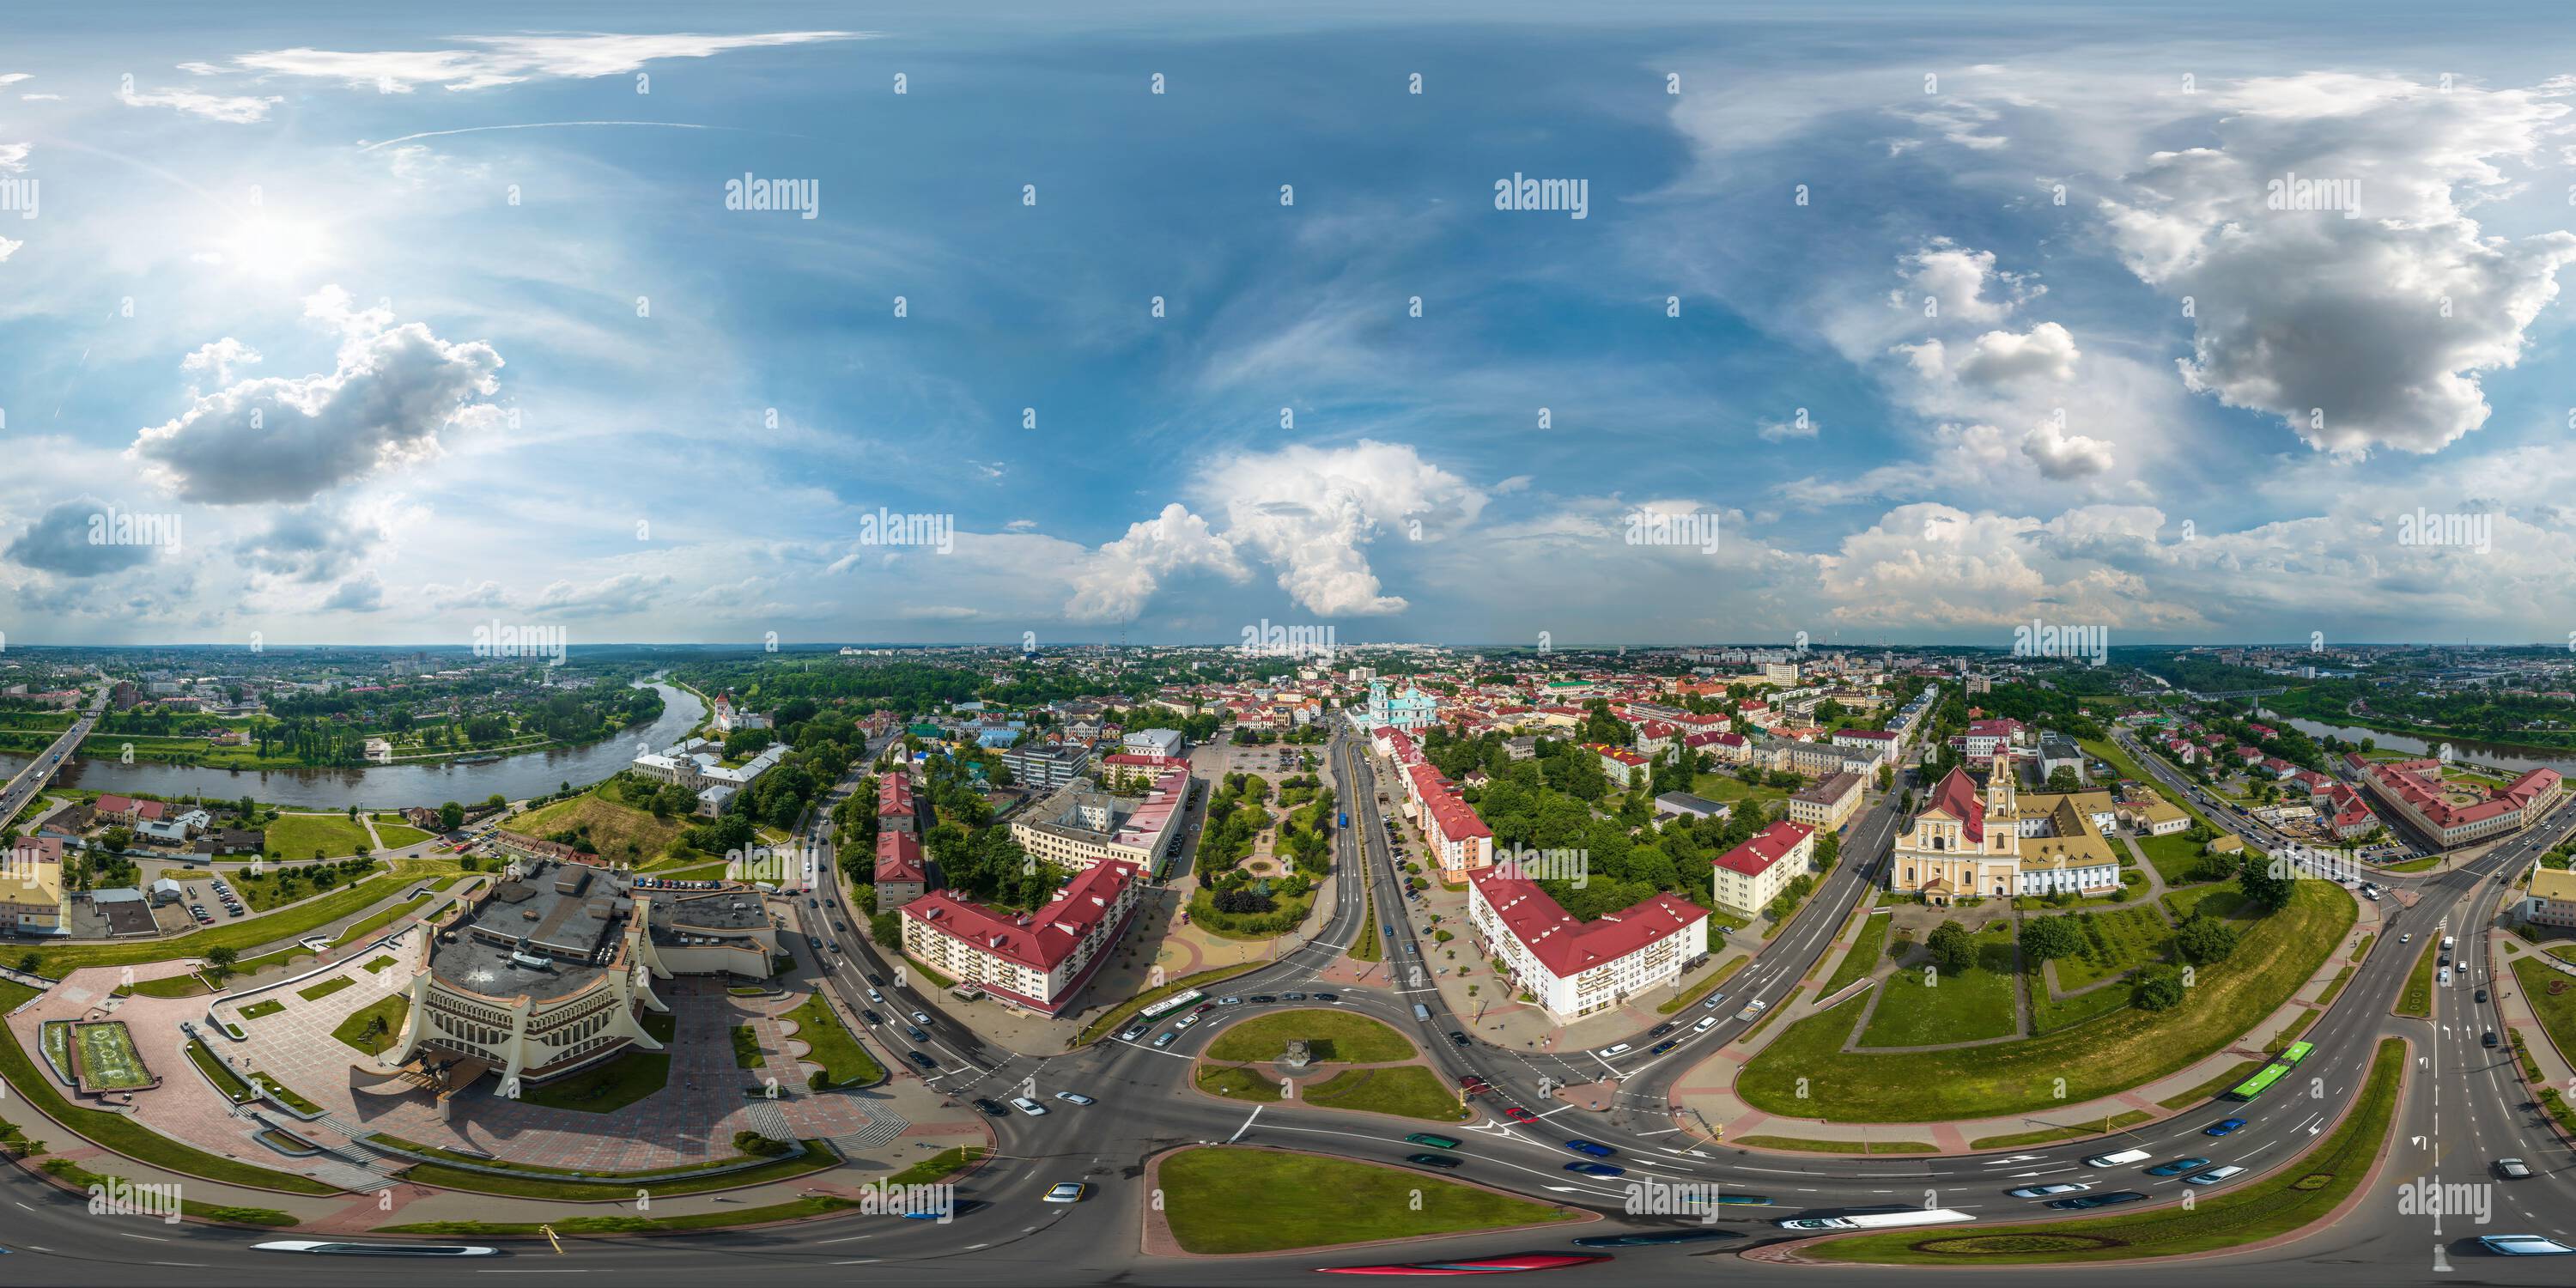 360 degree panoramic view of aerial full seamless spherical 360 hdri panorama view overlooking old town, urban development, historic buildings, crossroads with bridge across wide